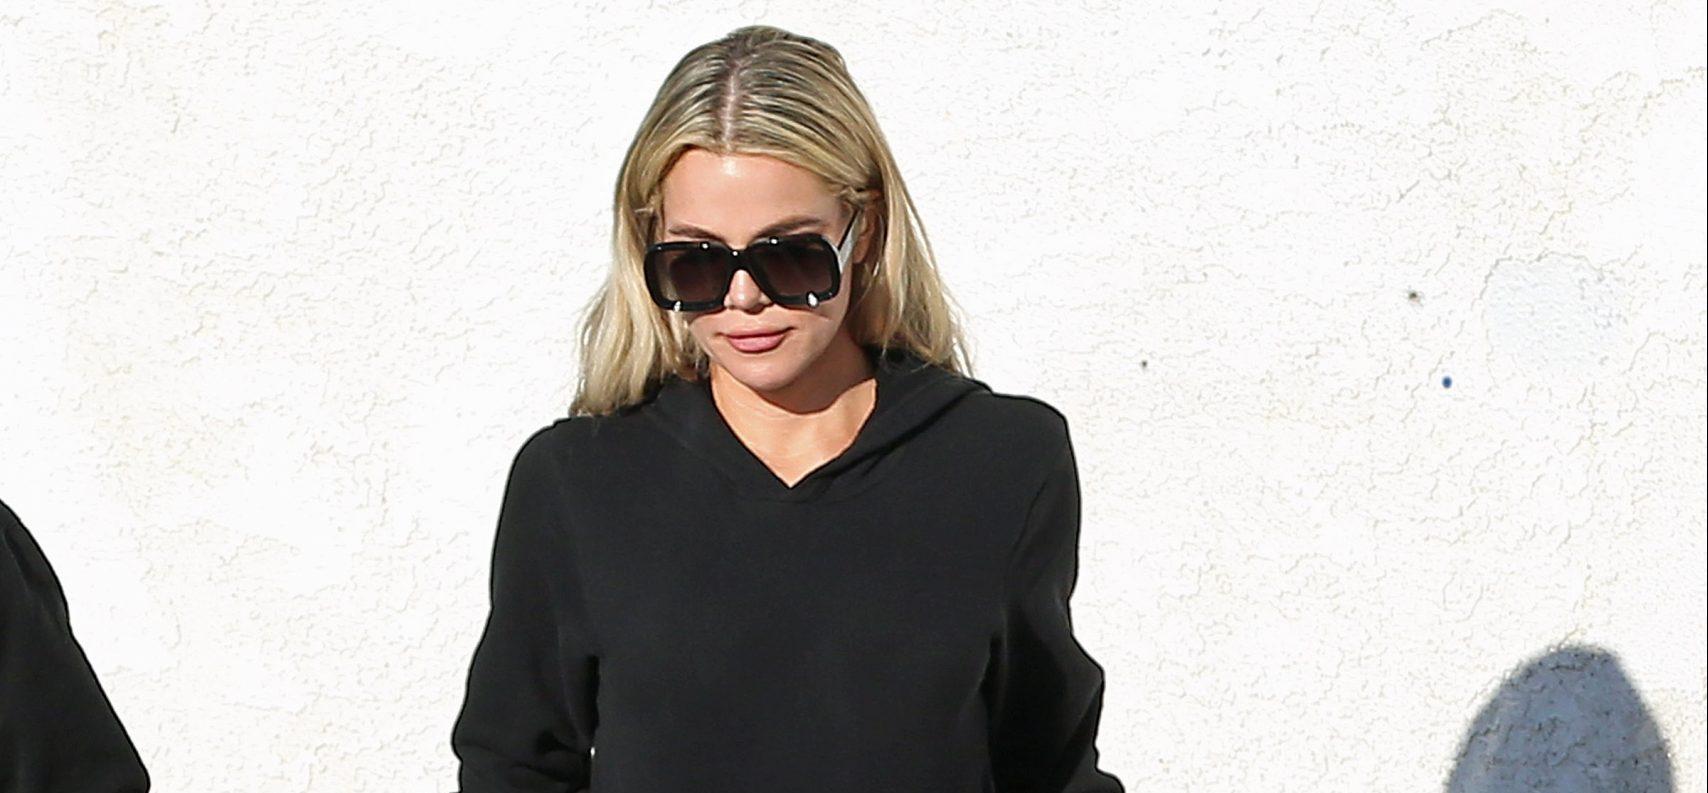 Khloe Kardashian picks up her daughter True Thompson from her dance class in Los Angeles